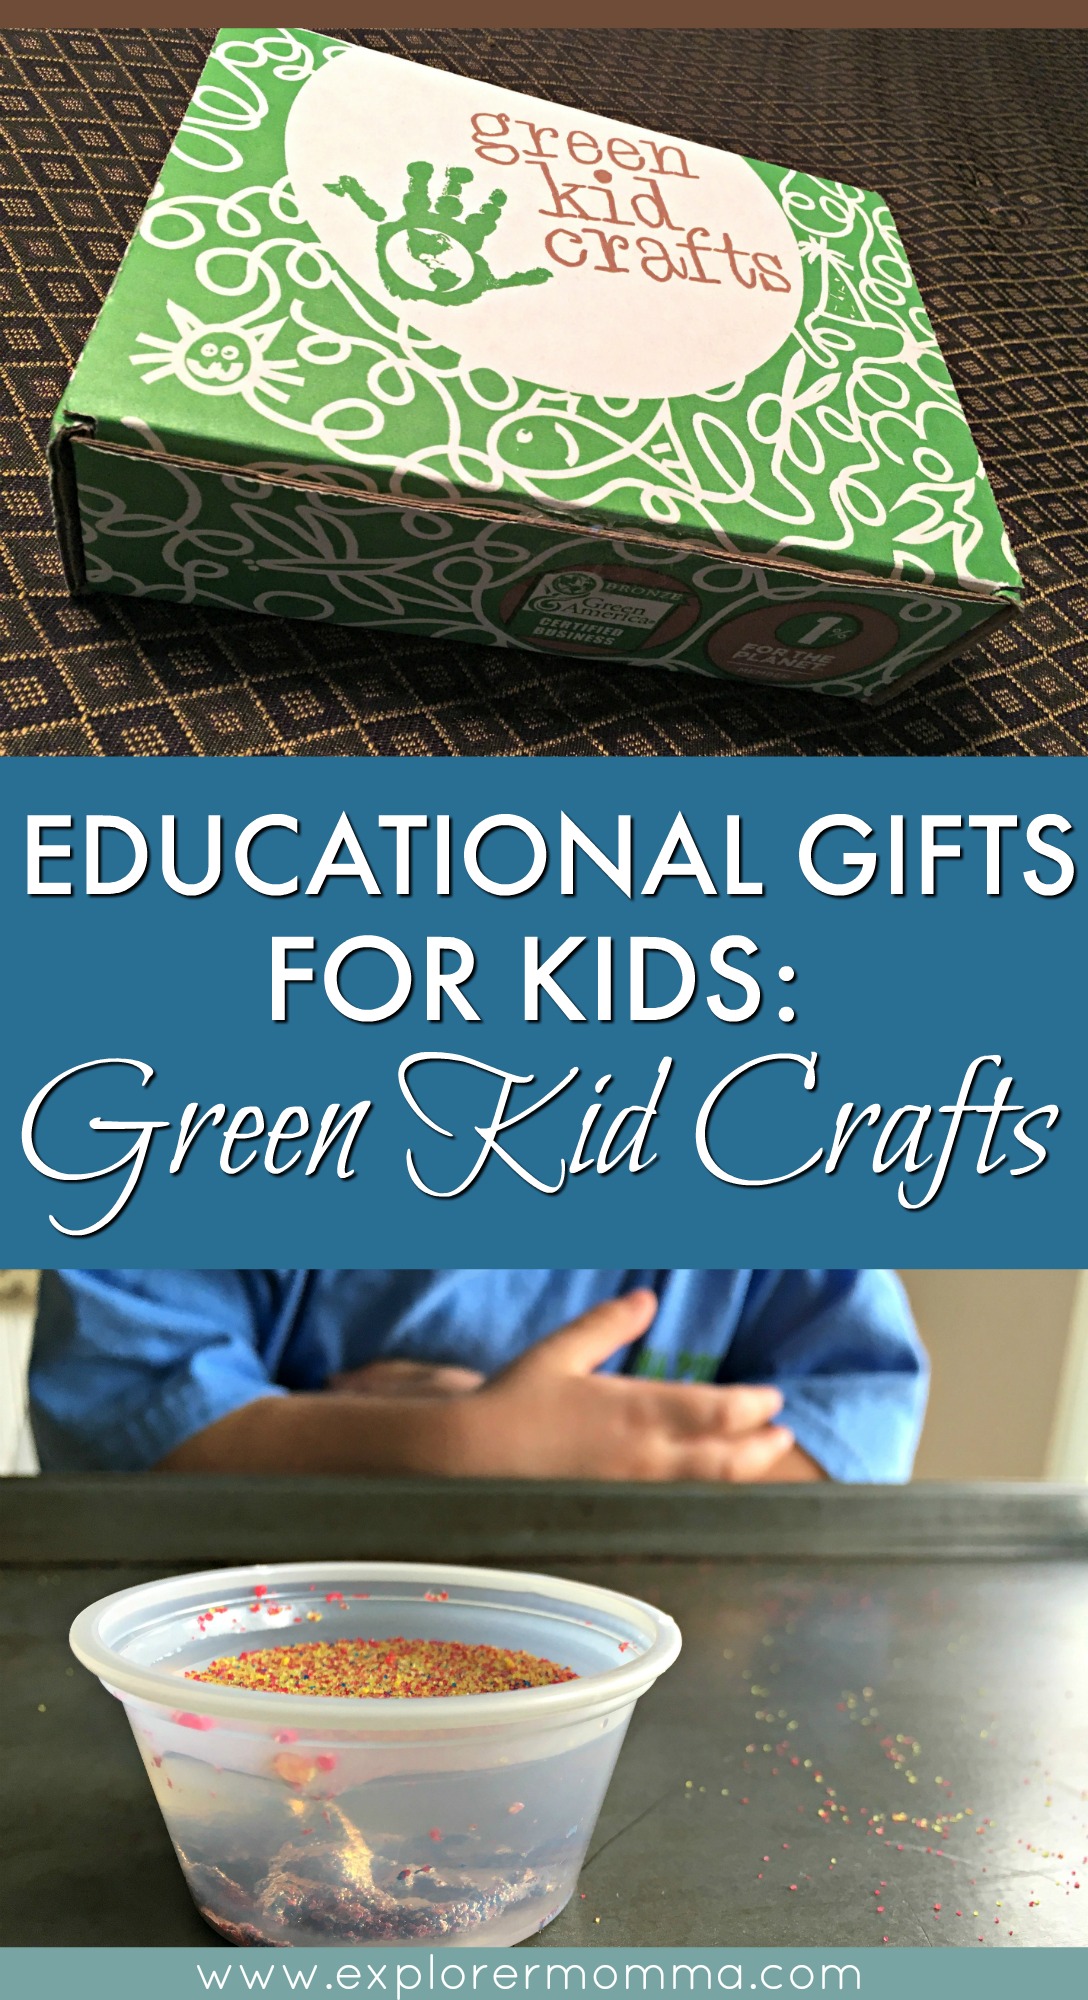 Educational Gifts For Kids Green Kid Crafts  Explorer Momma